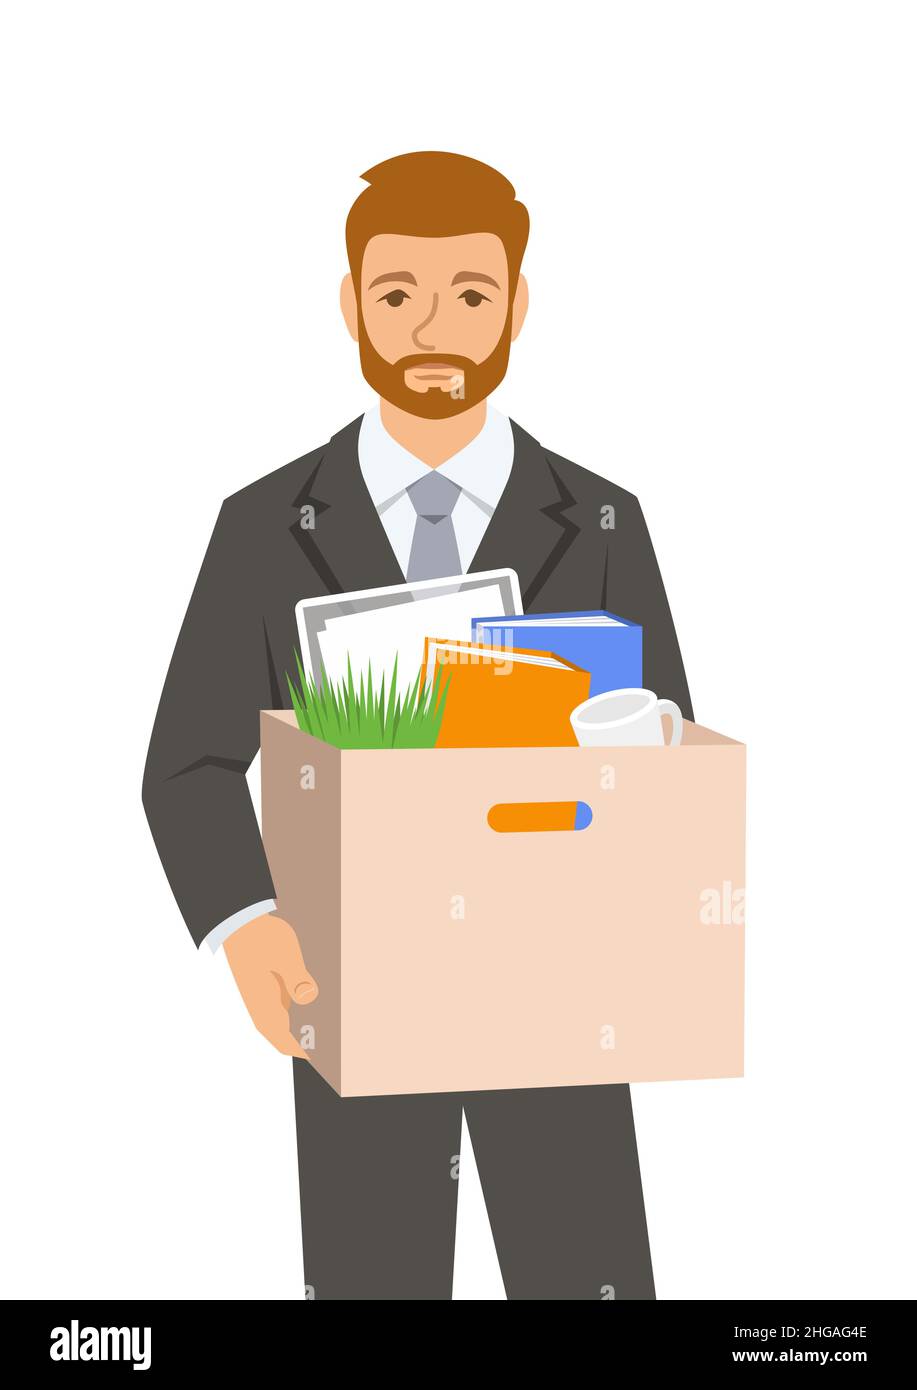 Unemployed fired man in business suit. Sad jobless office worker holds box with personal stuff. Upset face worried about job loss. Unemployment during Stock Vector